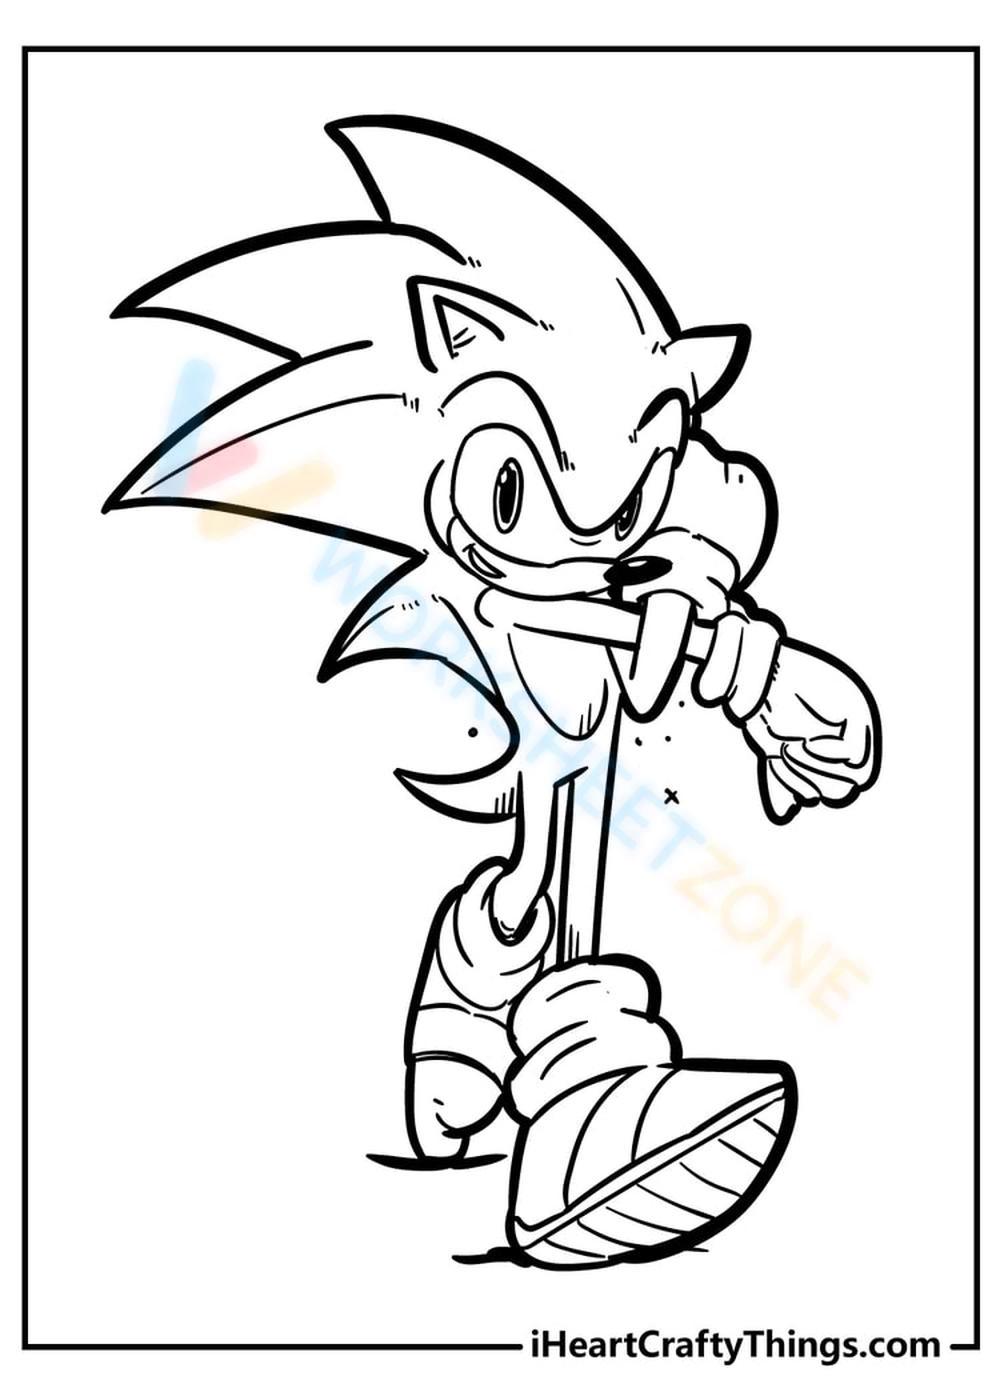 Grade sonic coloring pages worksheets